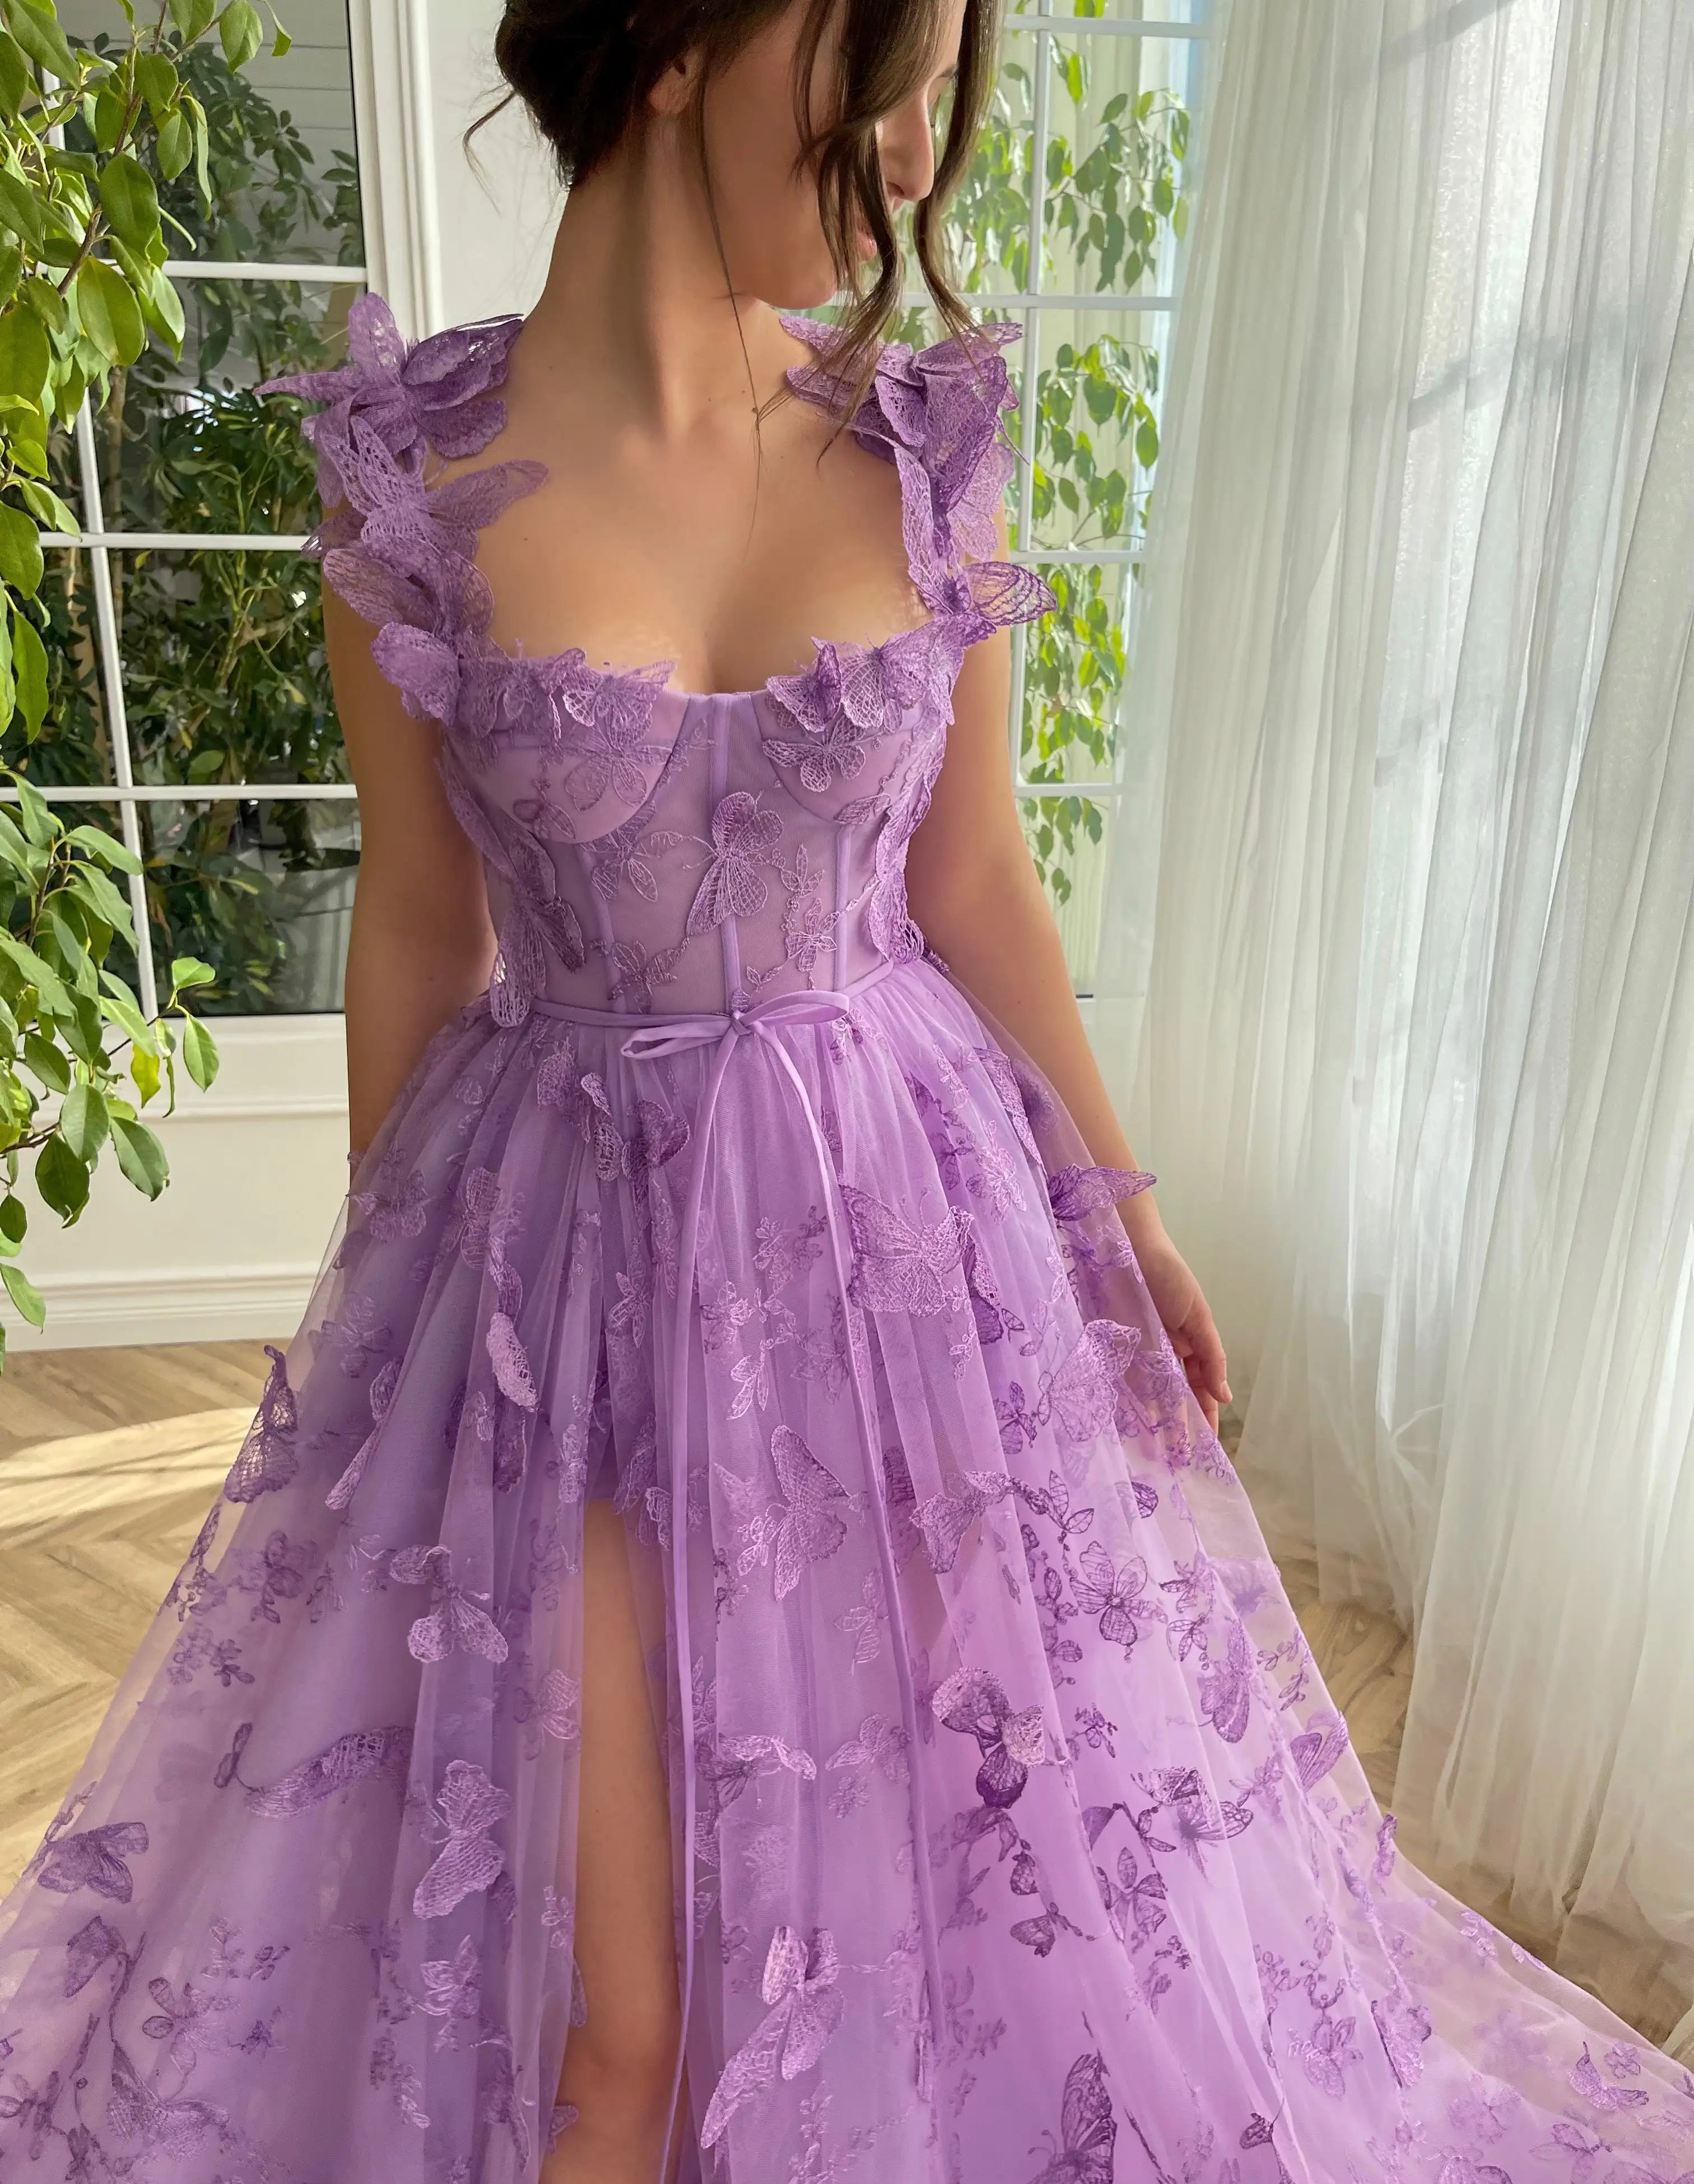 Oklulu Lilac Lace Prom Dresses  Butterfly Spaghetti Straps Sweetheart A Line with Pocket Belt Hi-lo Corset Zipper Back Evening Gown